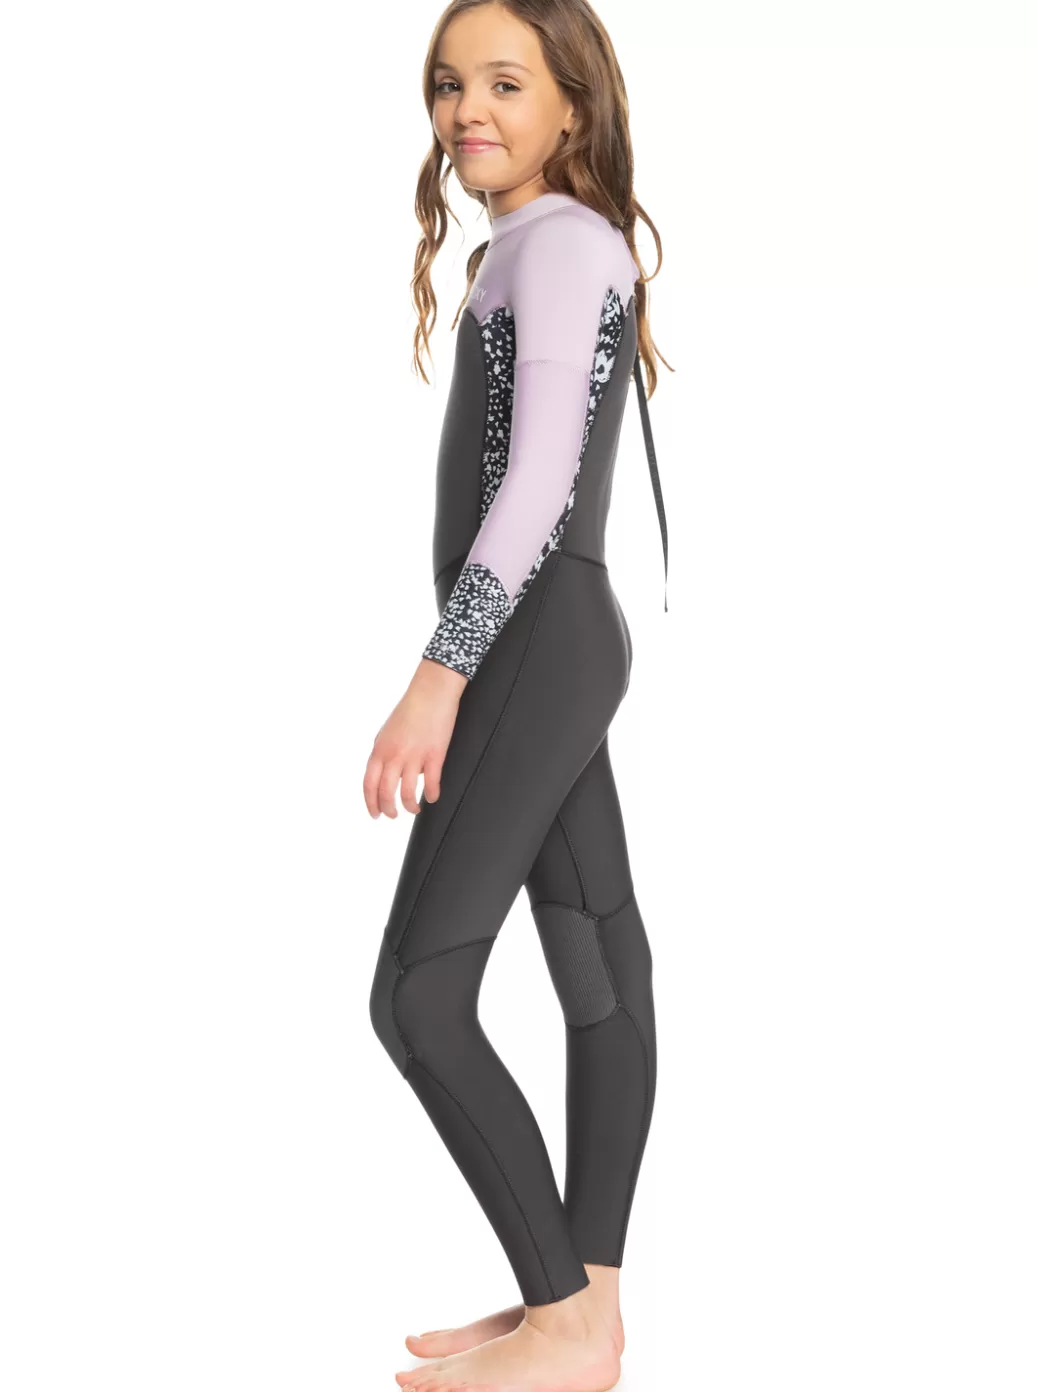 Surf | Swell Series | KIDS | WOMEN ROXY Girl's 8-16 4/3mmSwell Series Back Zip Wetsuit Jet/orchid Bouquet